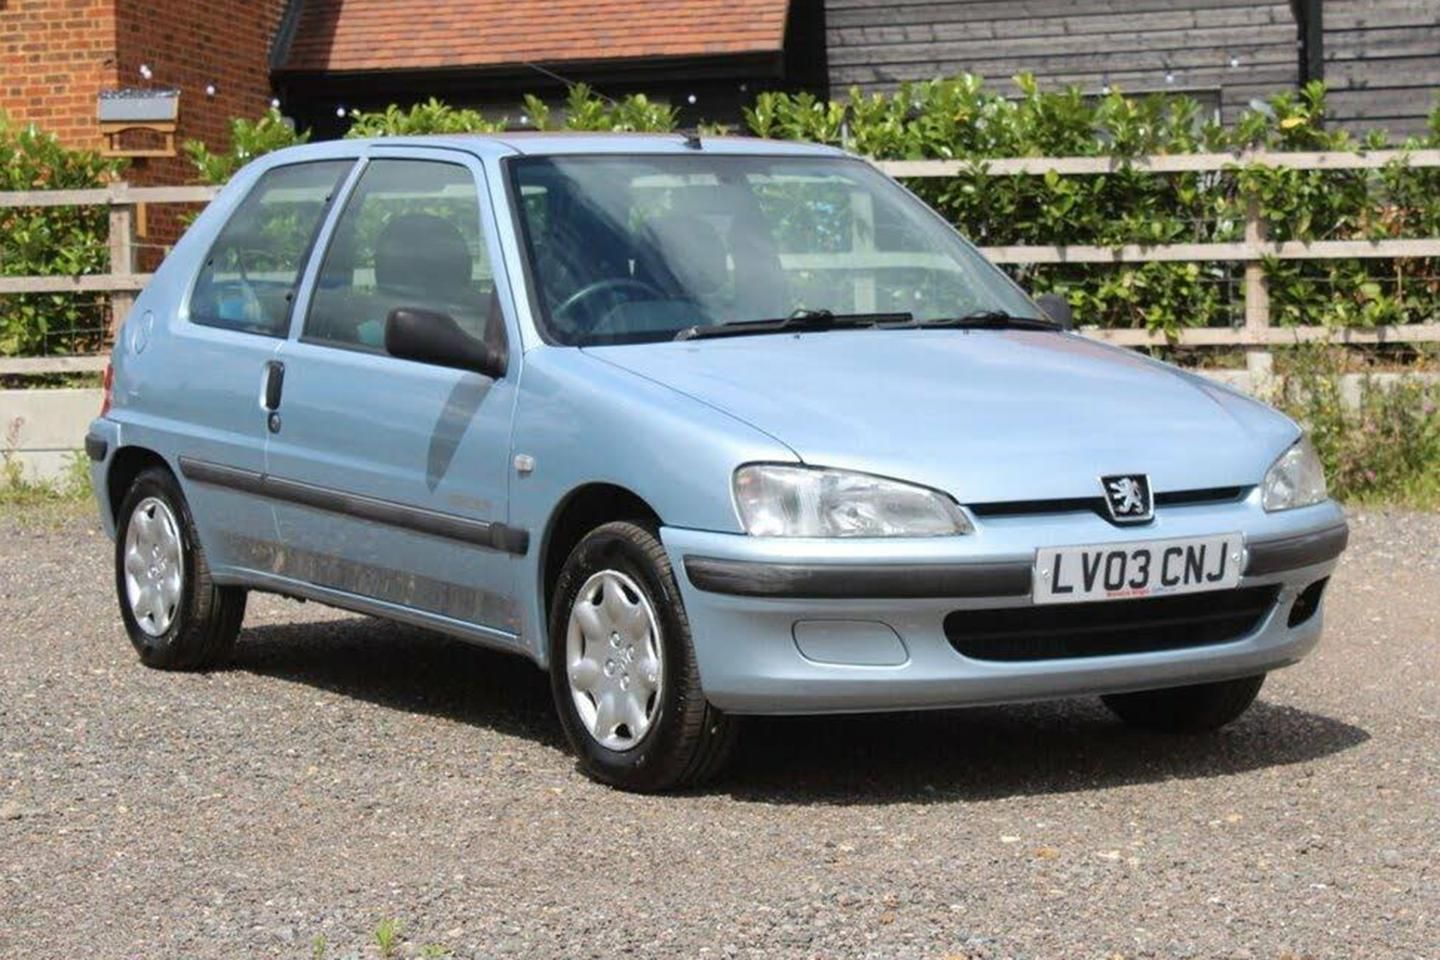 The PEUGEOT 106 is celebrating its 30th birthday, Peugeot